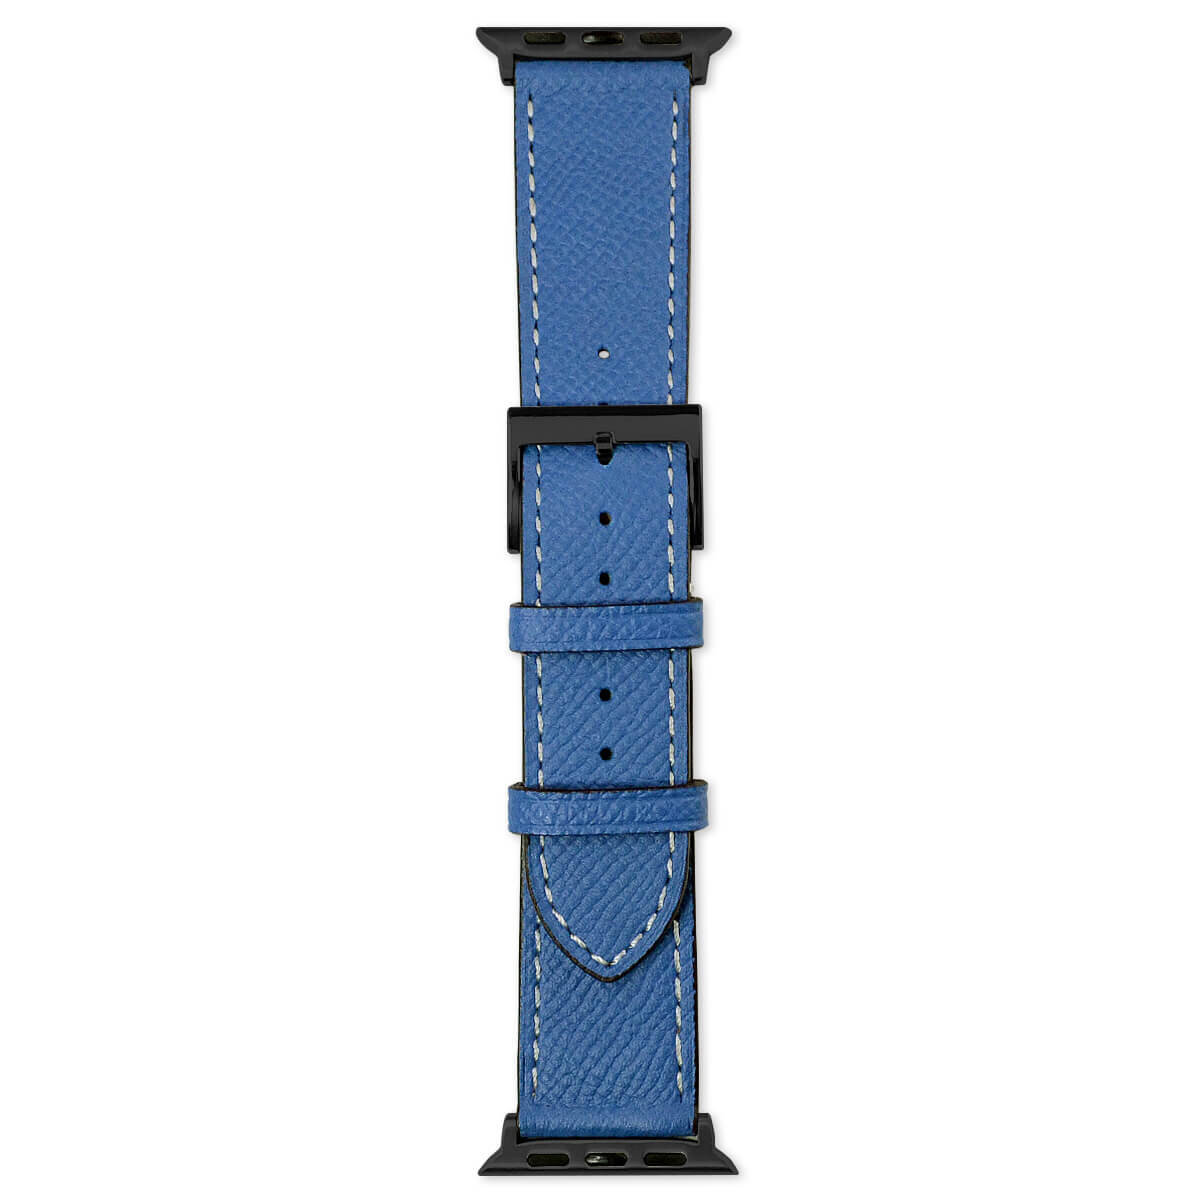 38mm/40mm/41mm Apple Watch Strap - Calf Leather Band (Bright Blue)